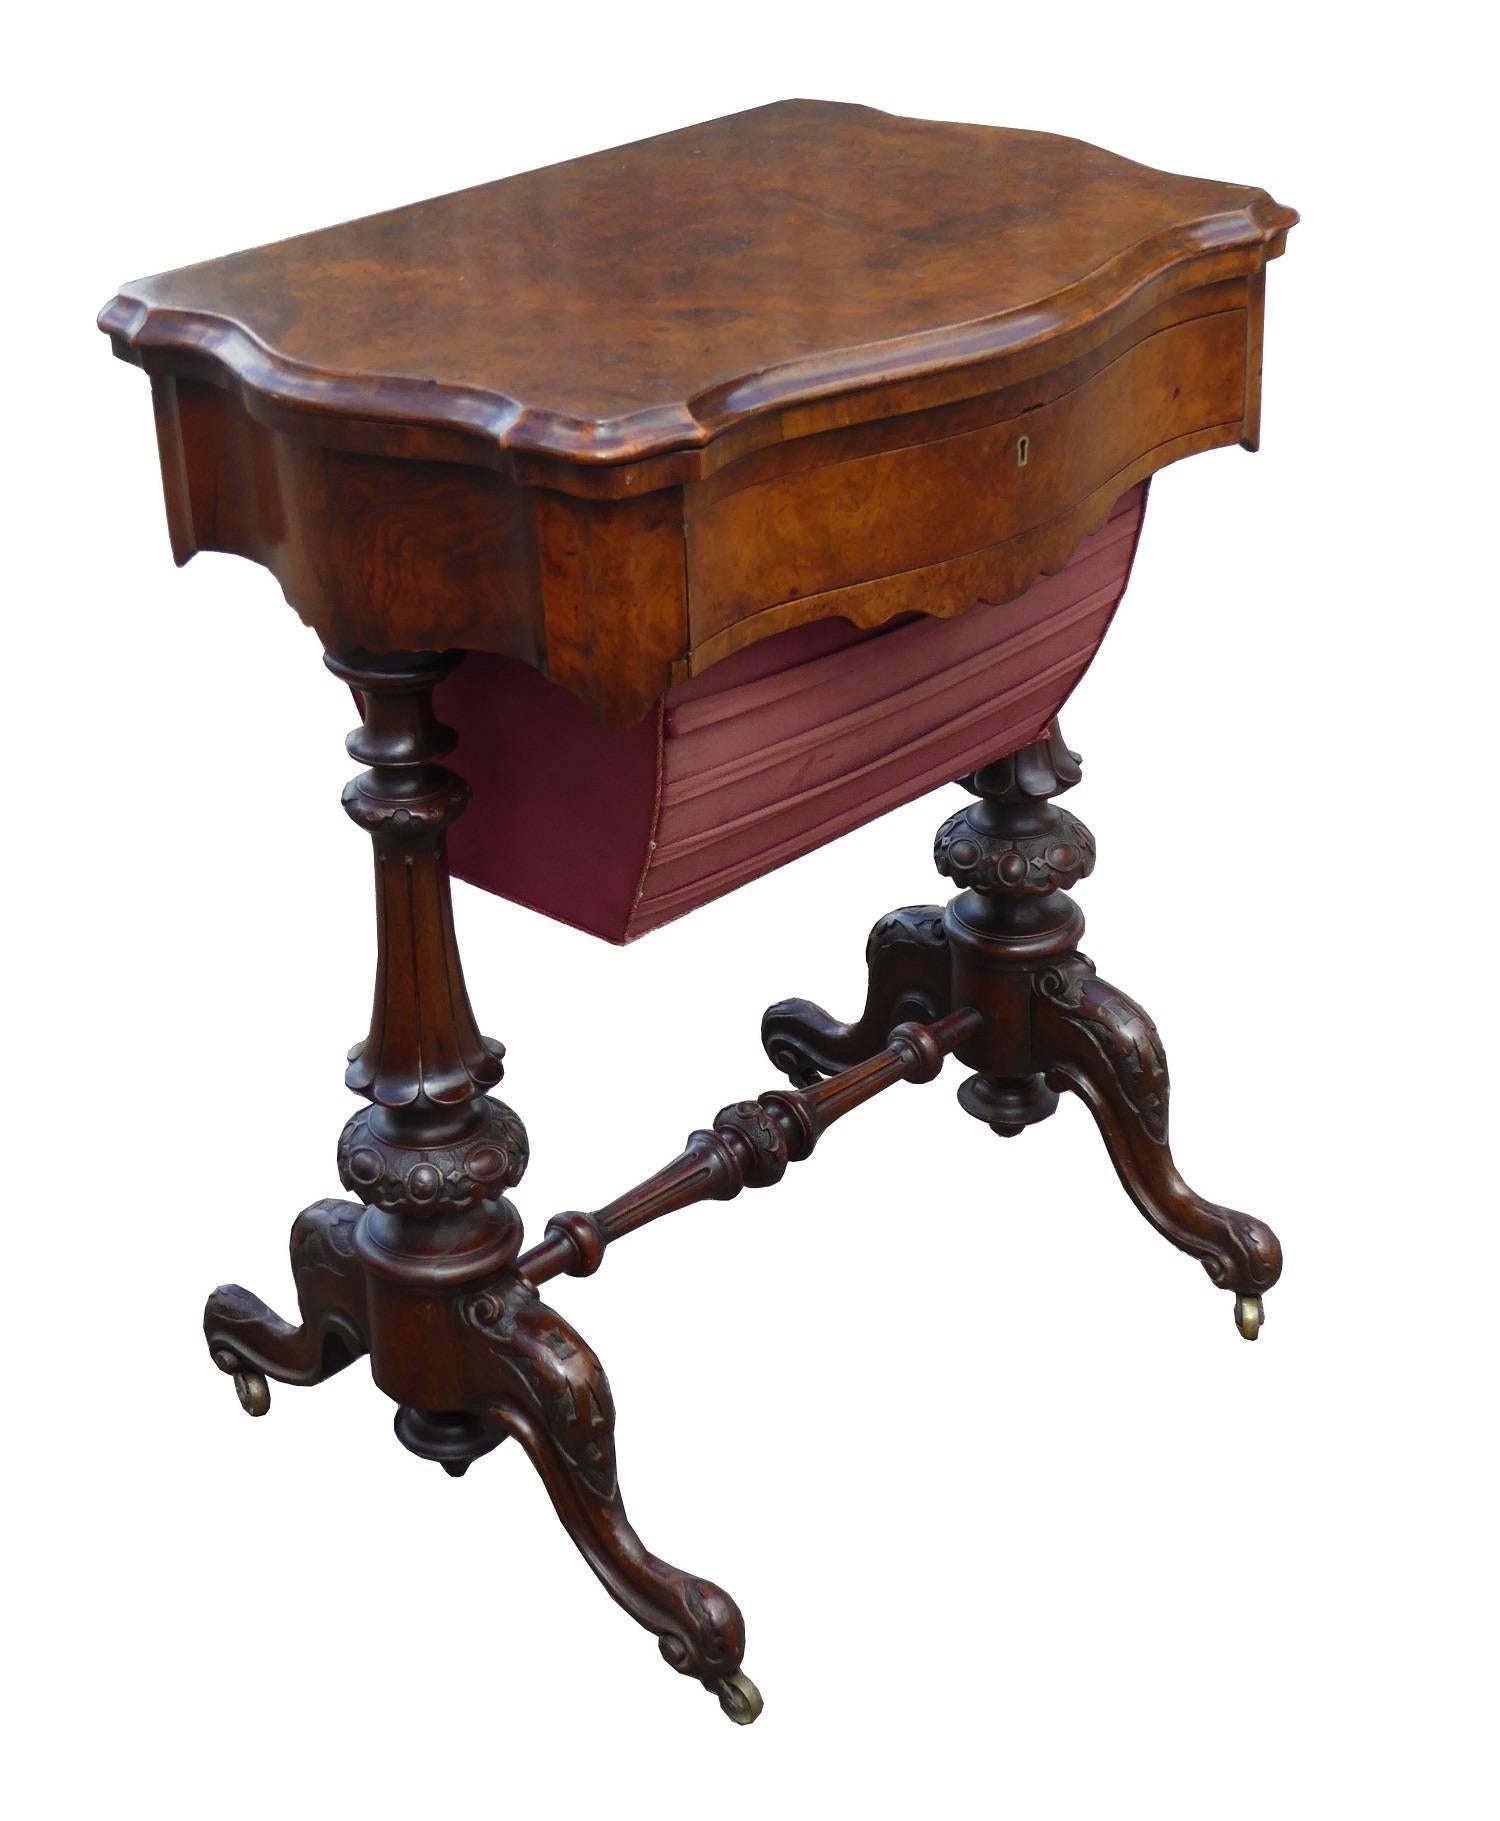 For sale is a good quality Victorian burr walnut work table or games table. The top of the table swivels and folds over to reveal a board for chess and for back gammon. Below this is a fitted drawer, above a pull-out basket. The table has ornately